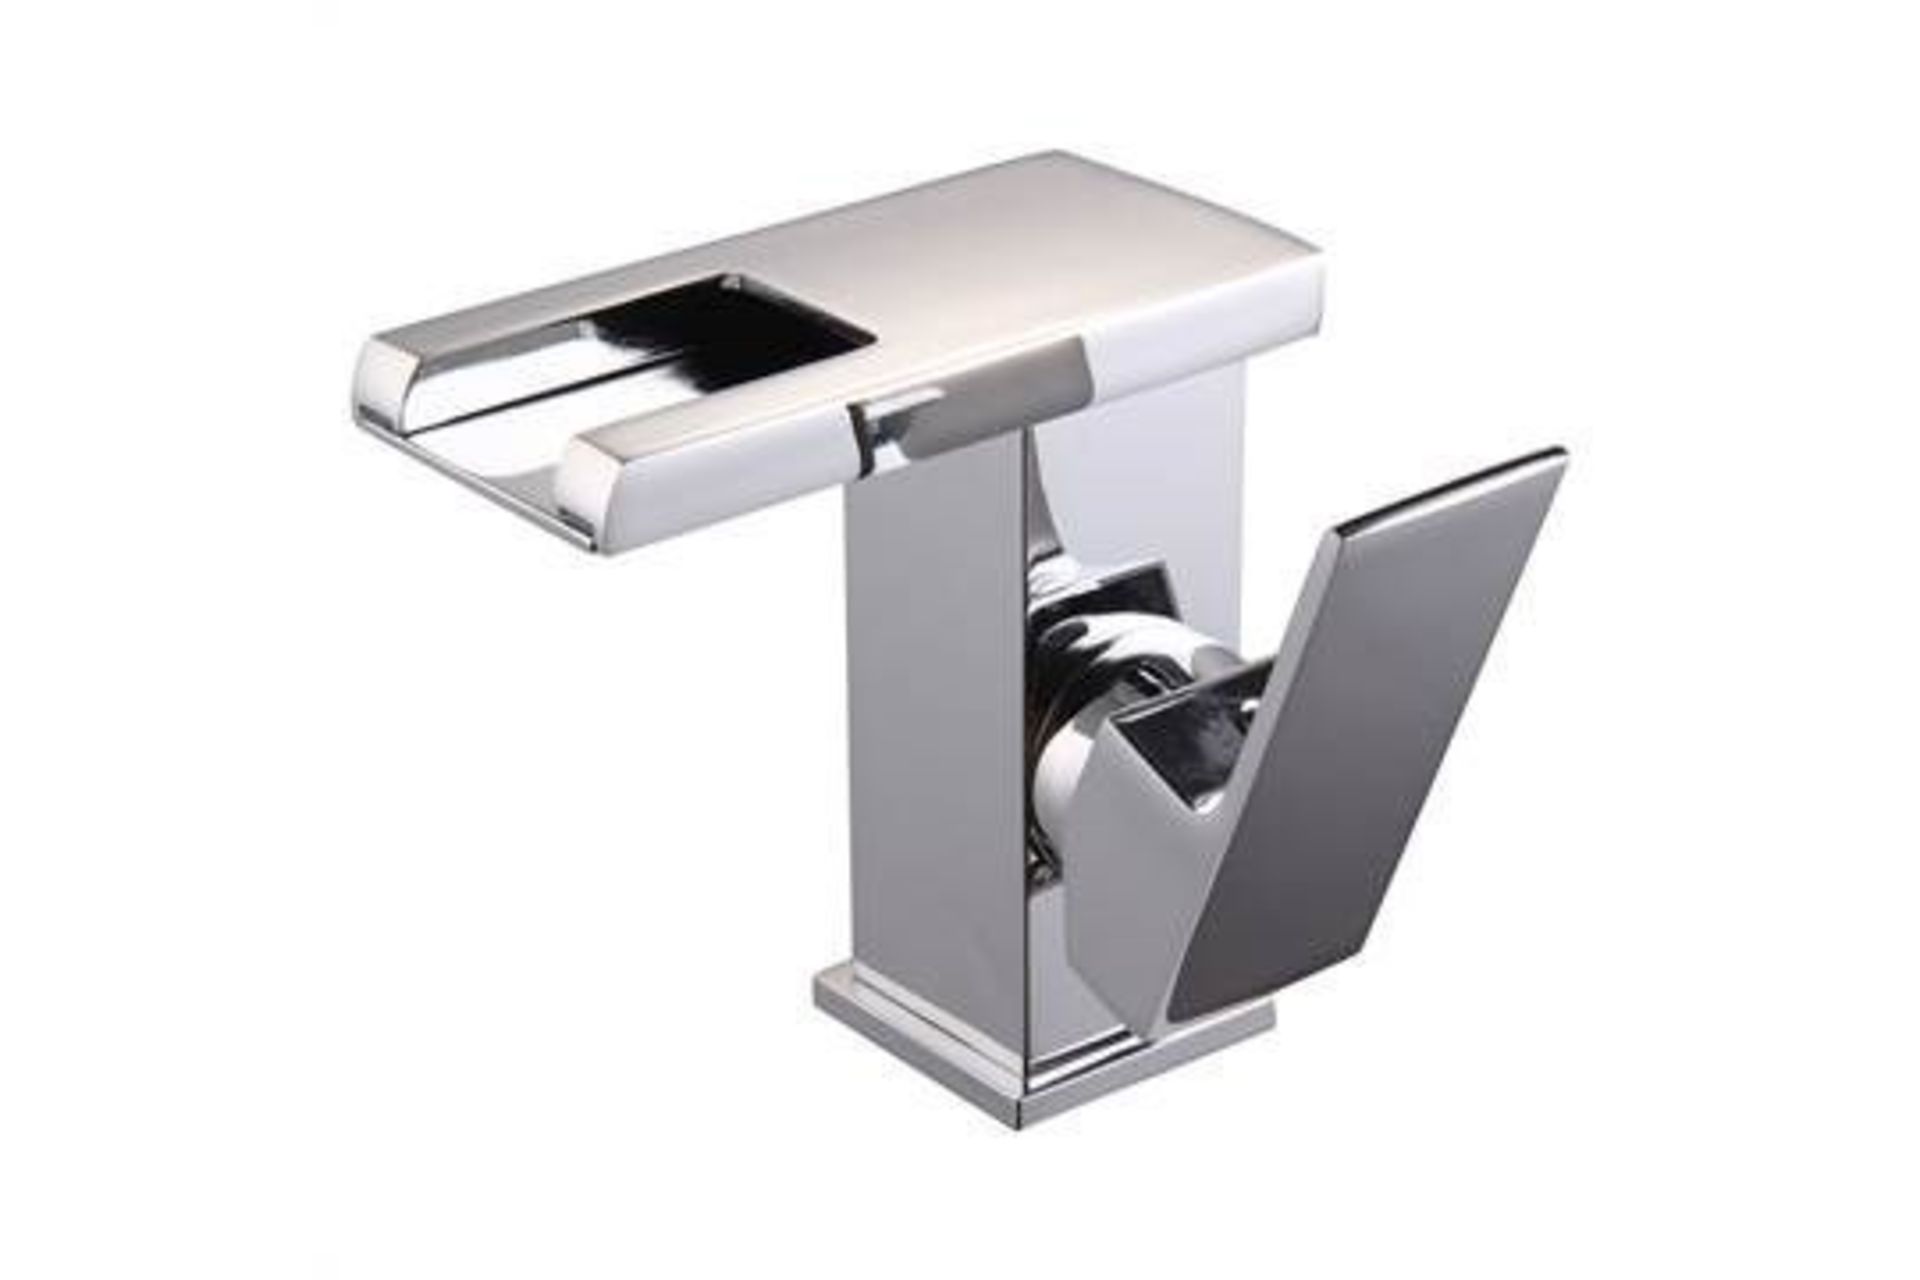 LED Waterfall Bathroom Basin Mixer Tap. RRP £229.99.Easy to install and clean. All copperLEDLED - Image 3 of 3